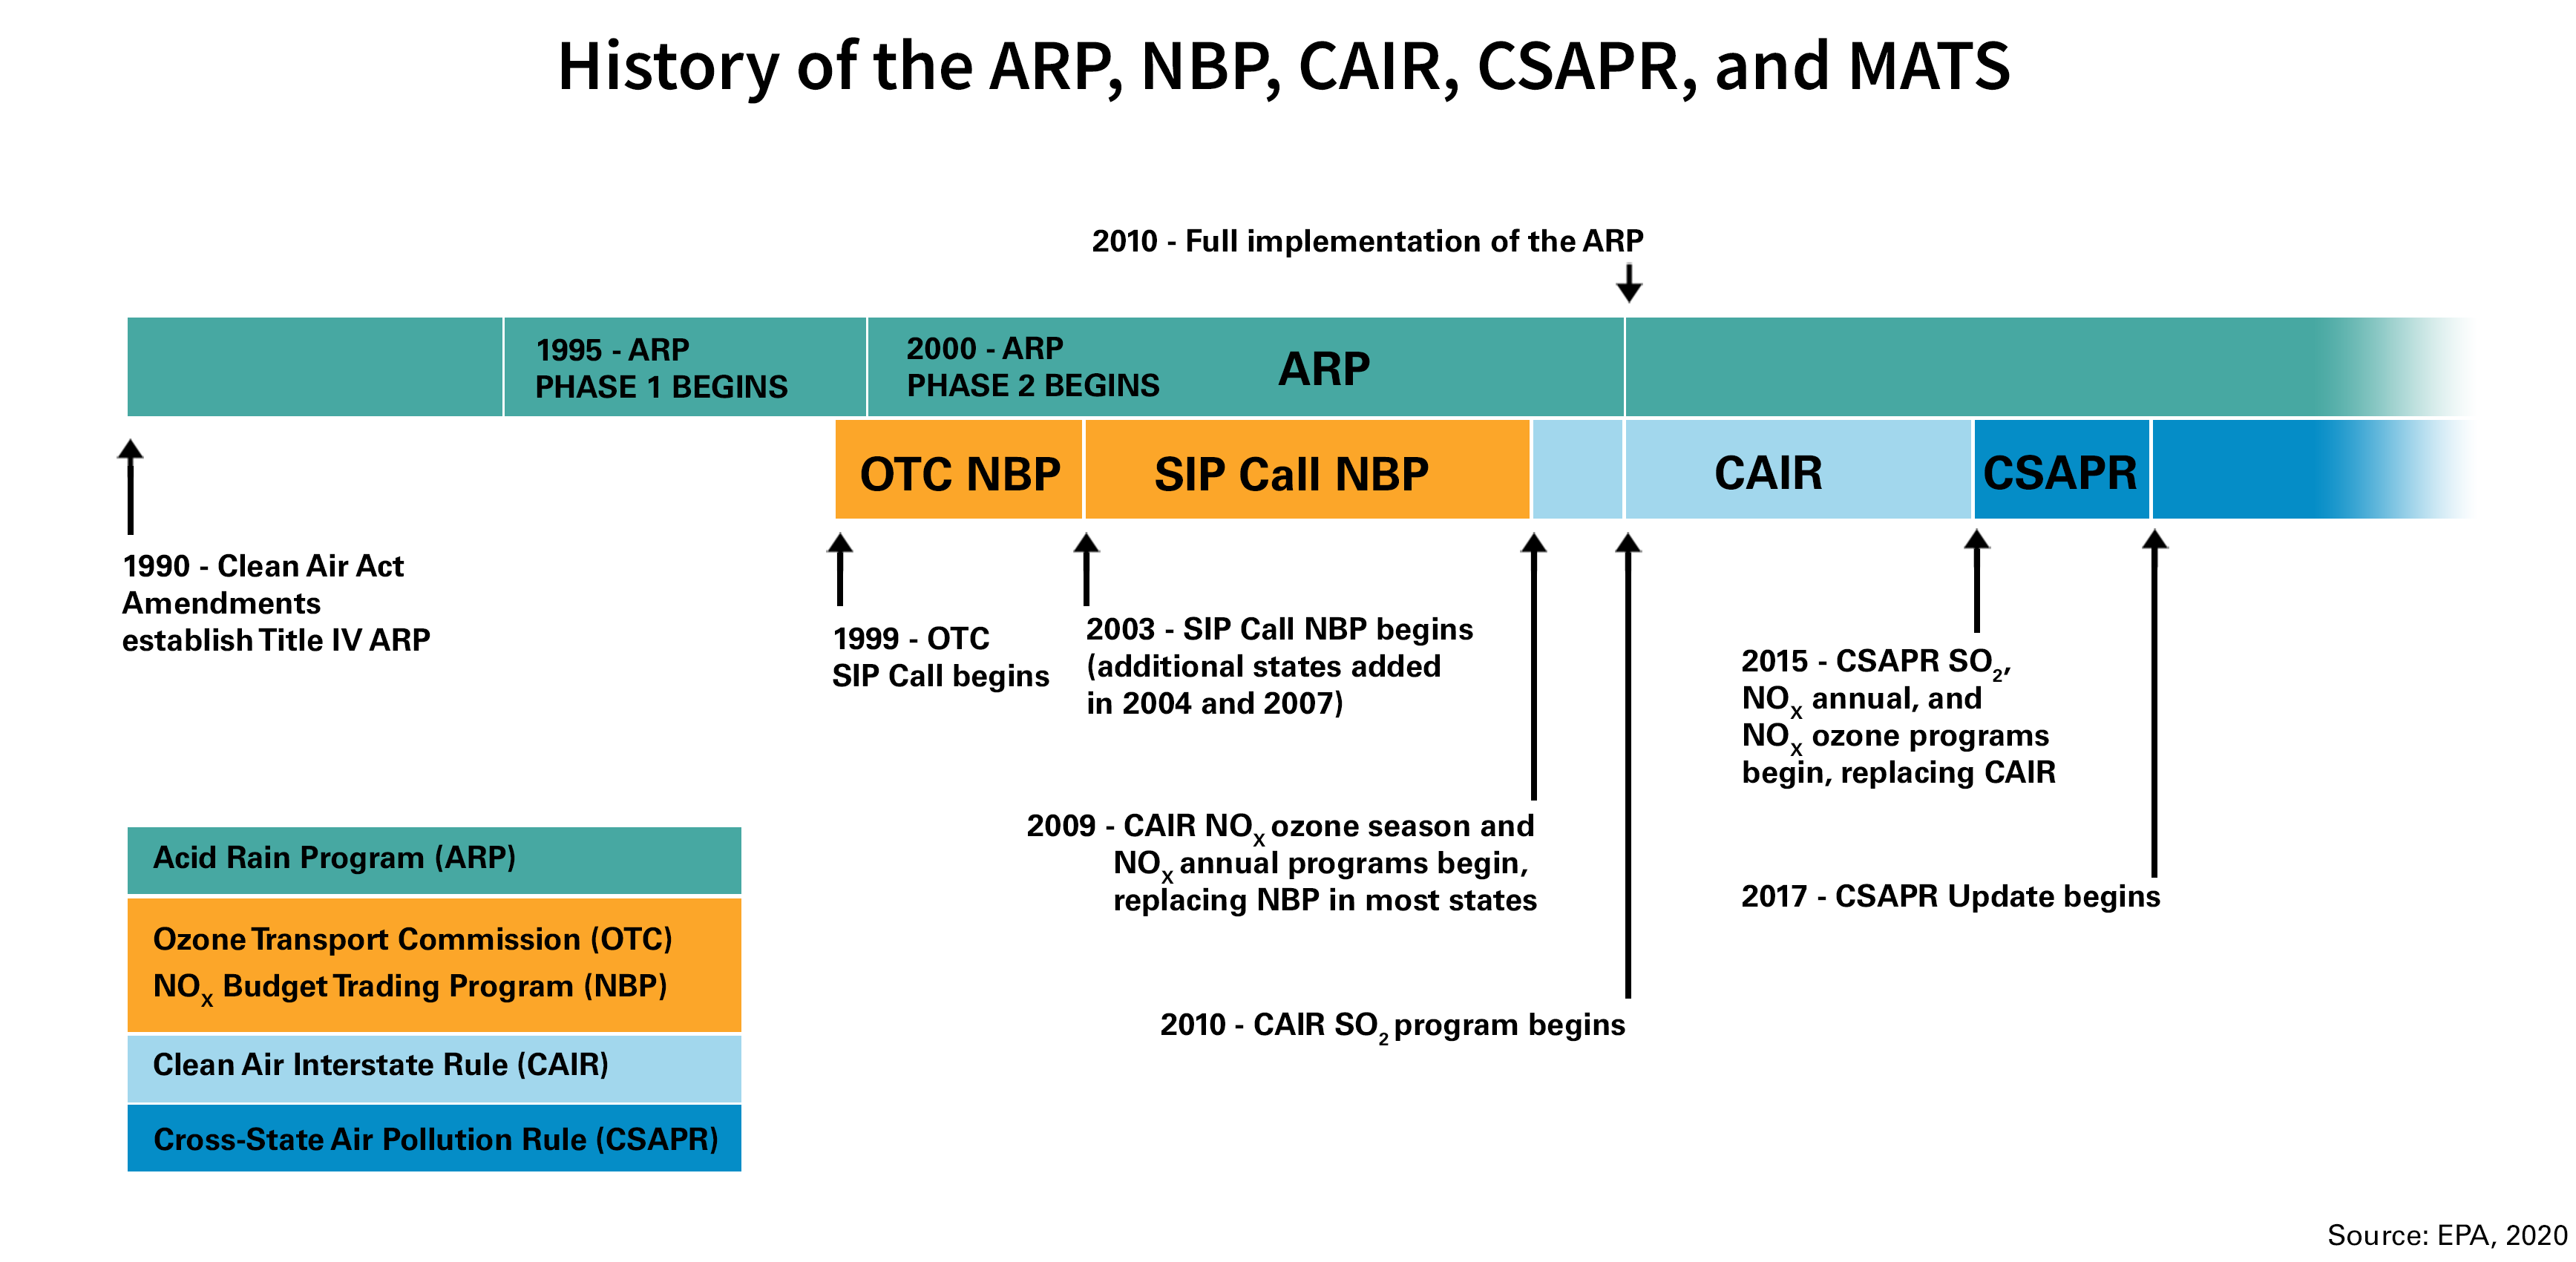 Timeline of Clean Air Markets programs